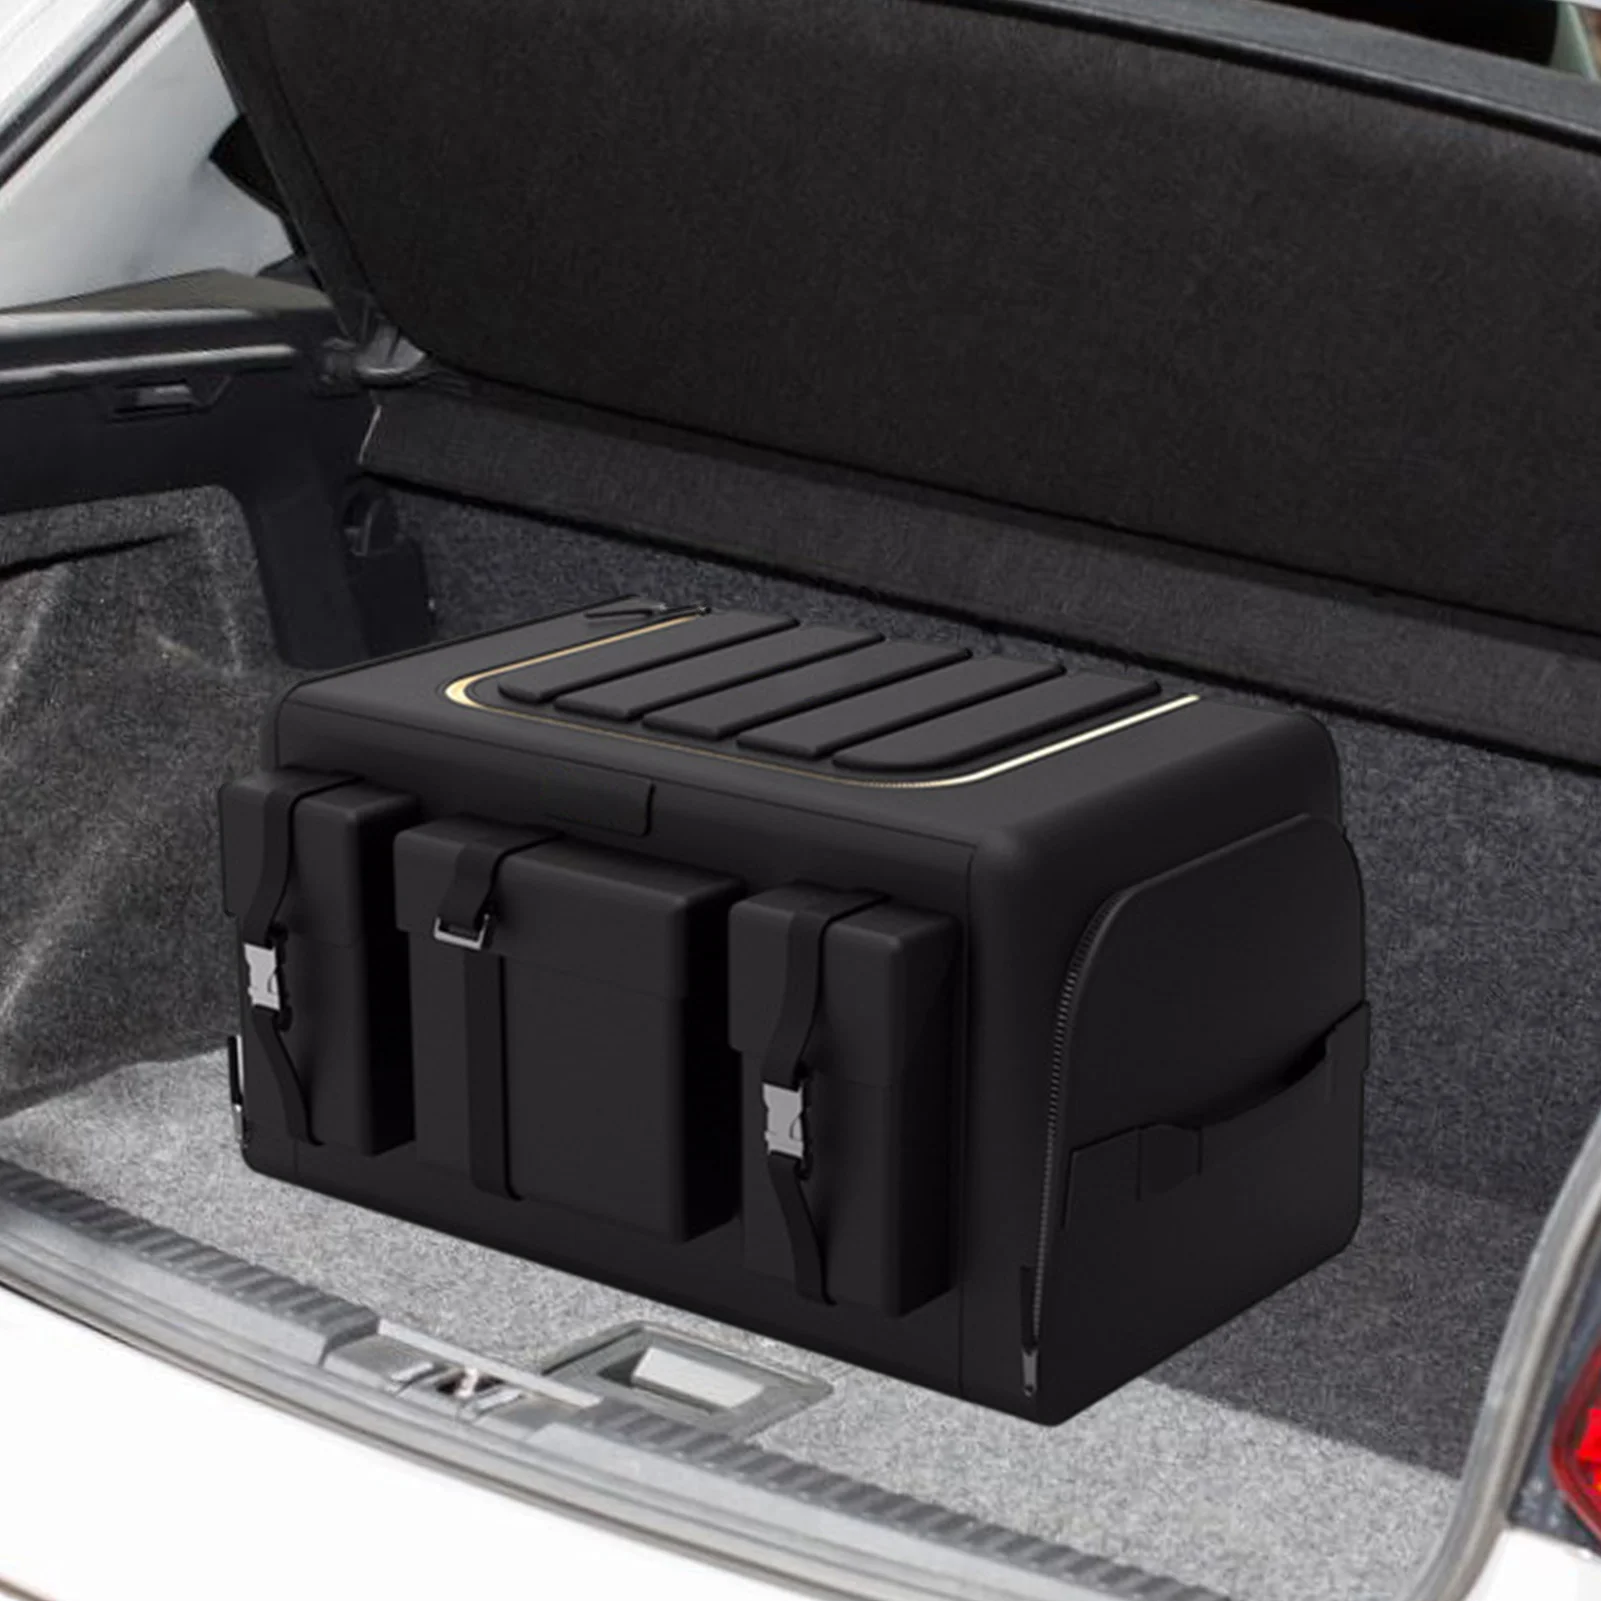 Foldable Storage Cargo Box for SUV Auto Truck Super Strong Starling's Car Trunk Organizer Fits Any Vehicle Nonslip Waterproof Bottom Black W LID 